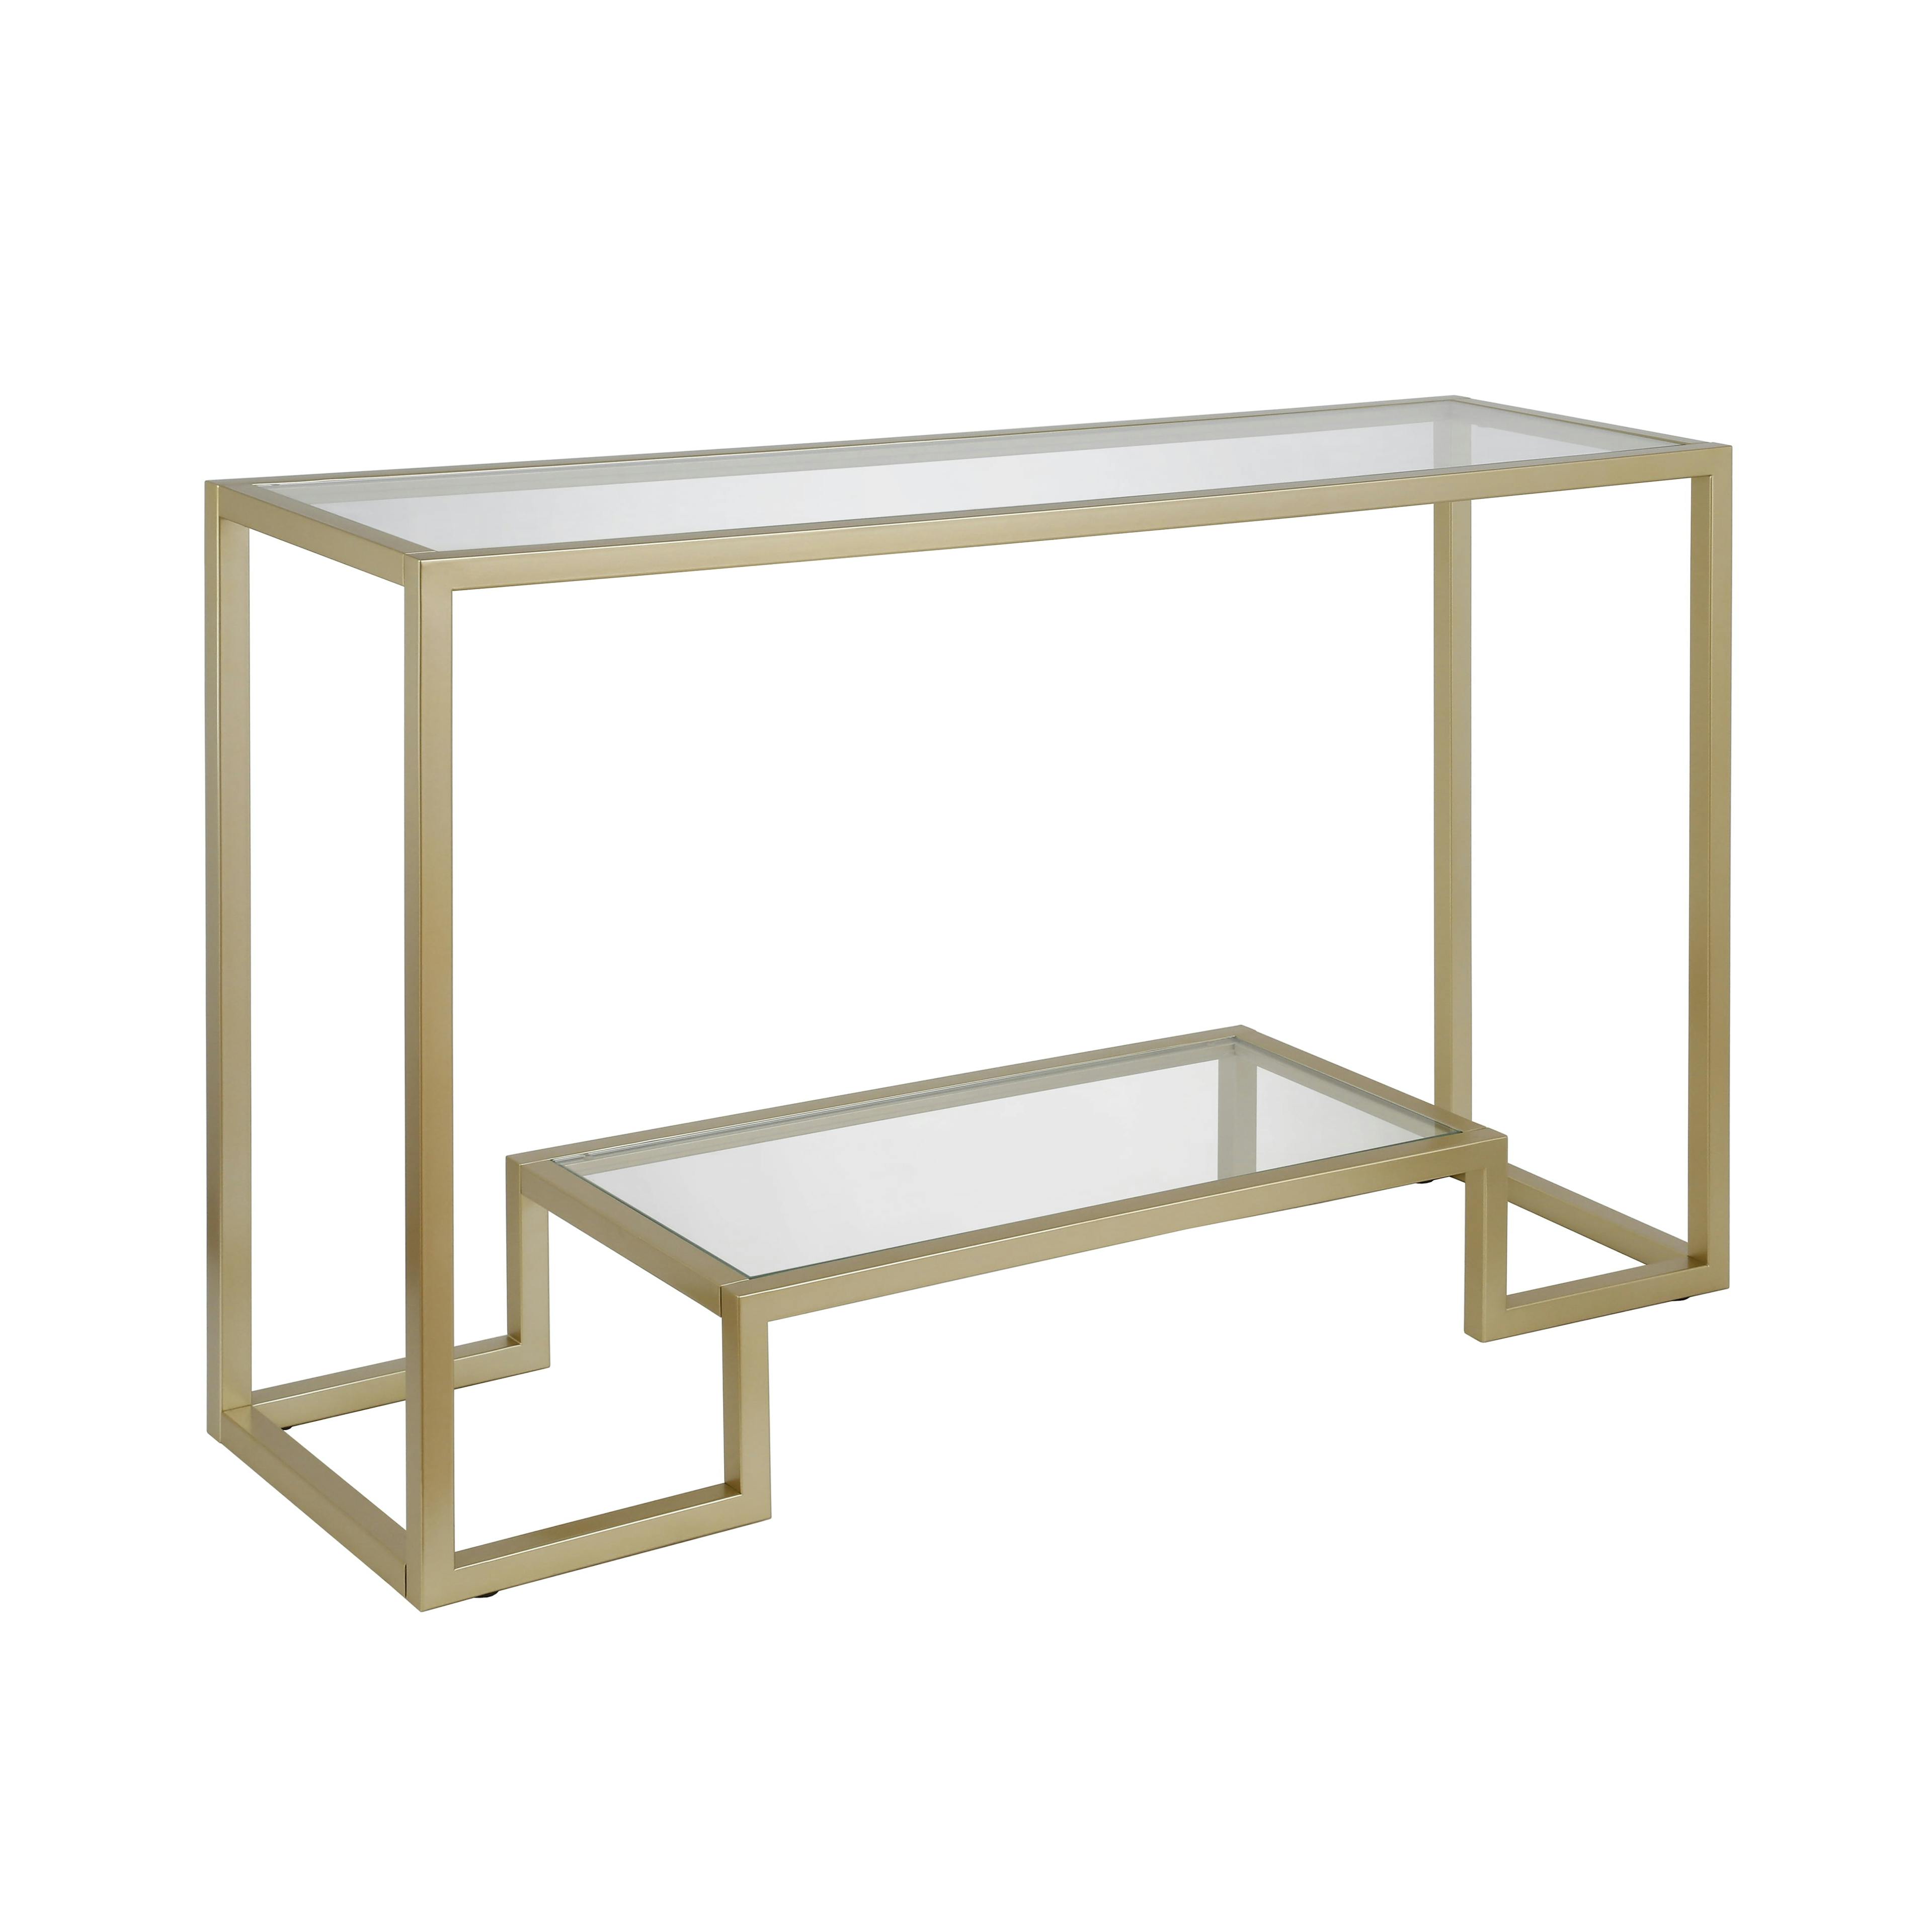 Athena Gold Metal & Glass Rectangular Console Table with Storage Shelf